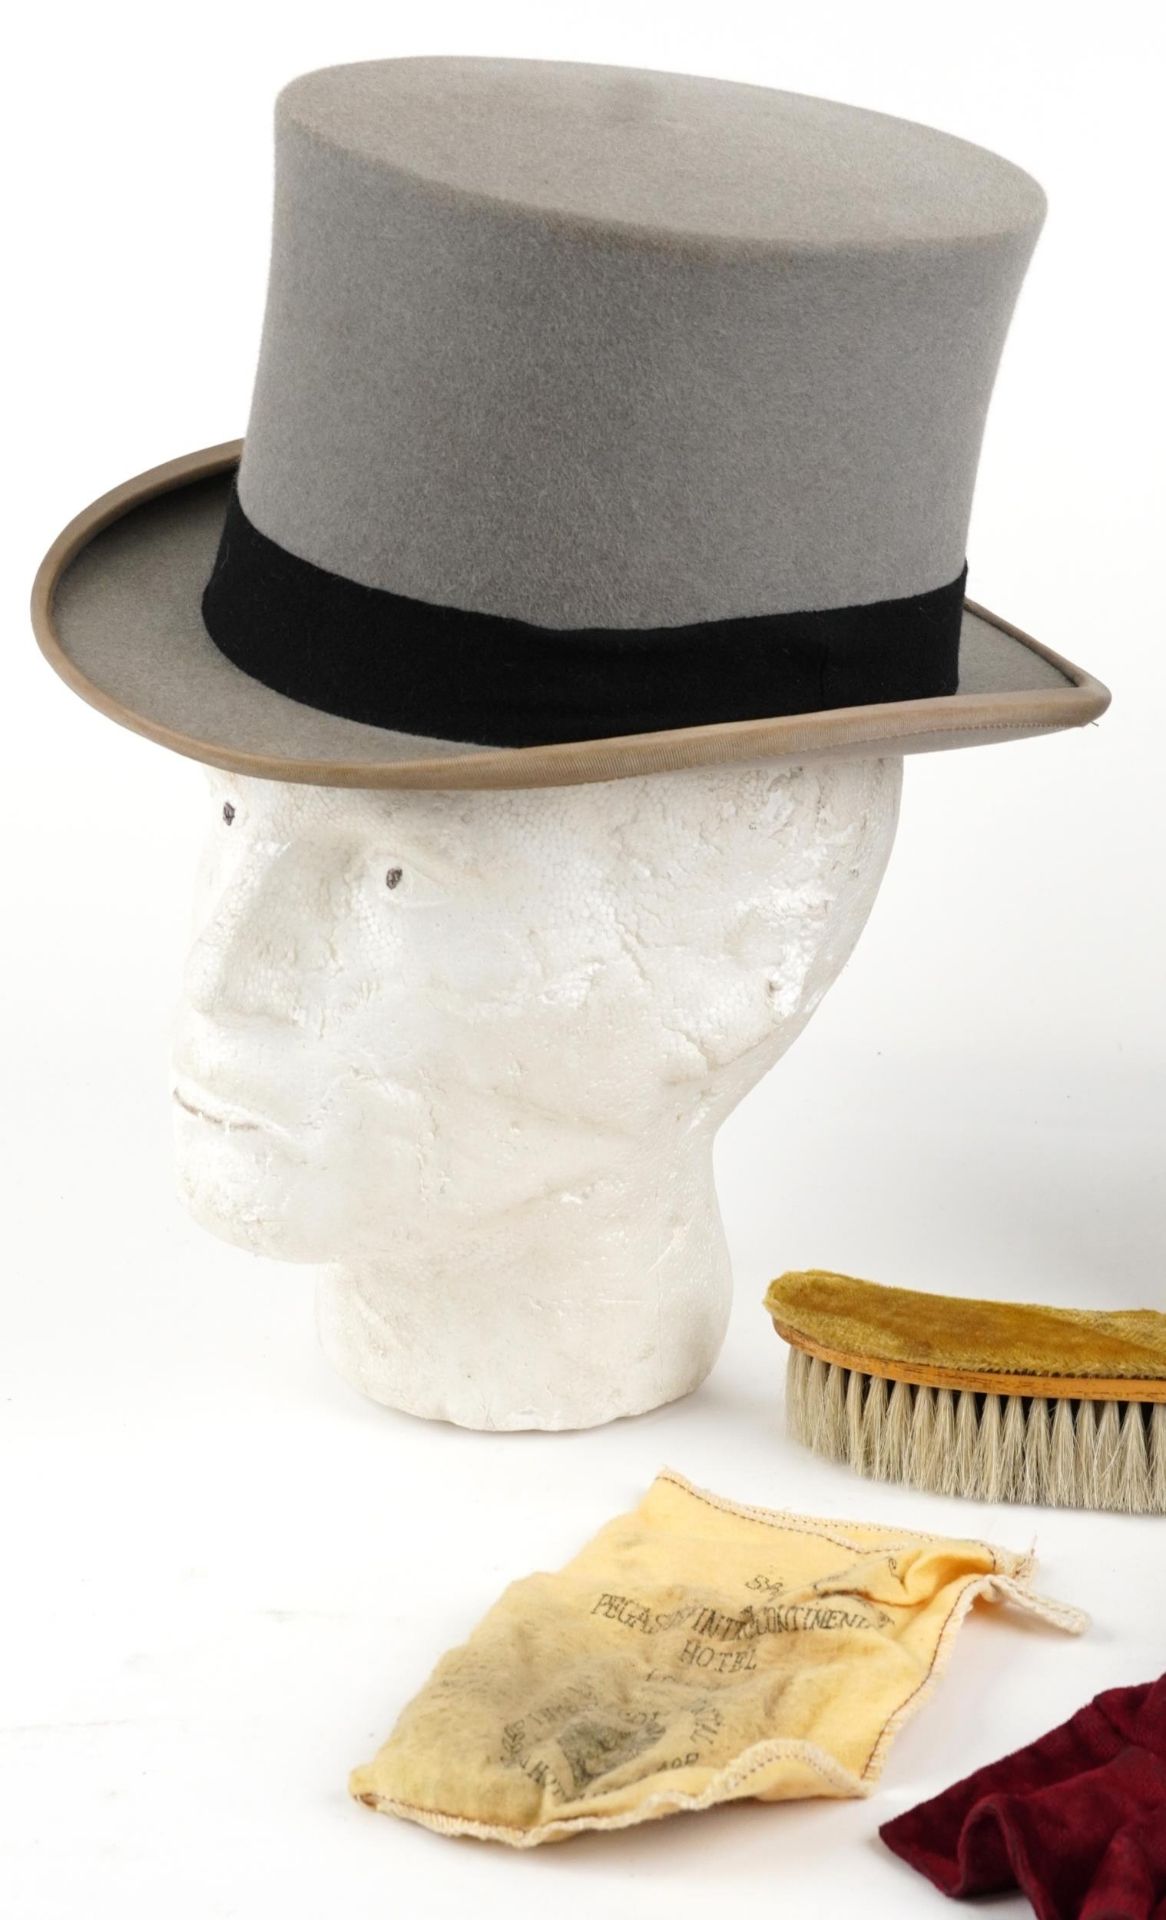 Scott & Co top hat housed in a brown leatherette travel box, the top hat interior size 21cm x 17cm : - Image 4 of 7